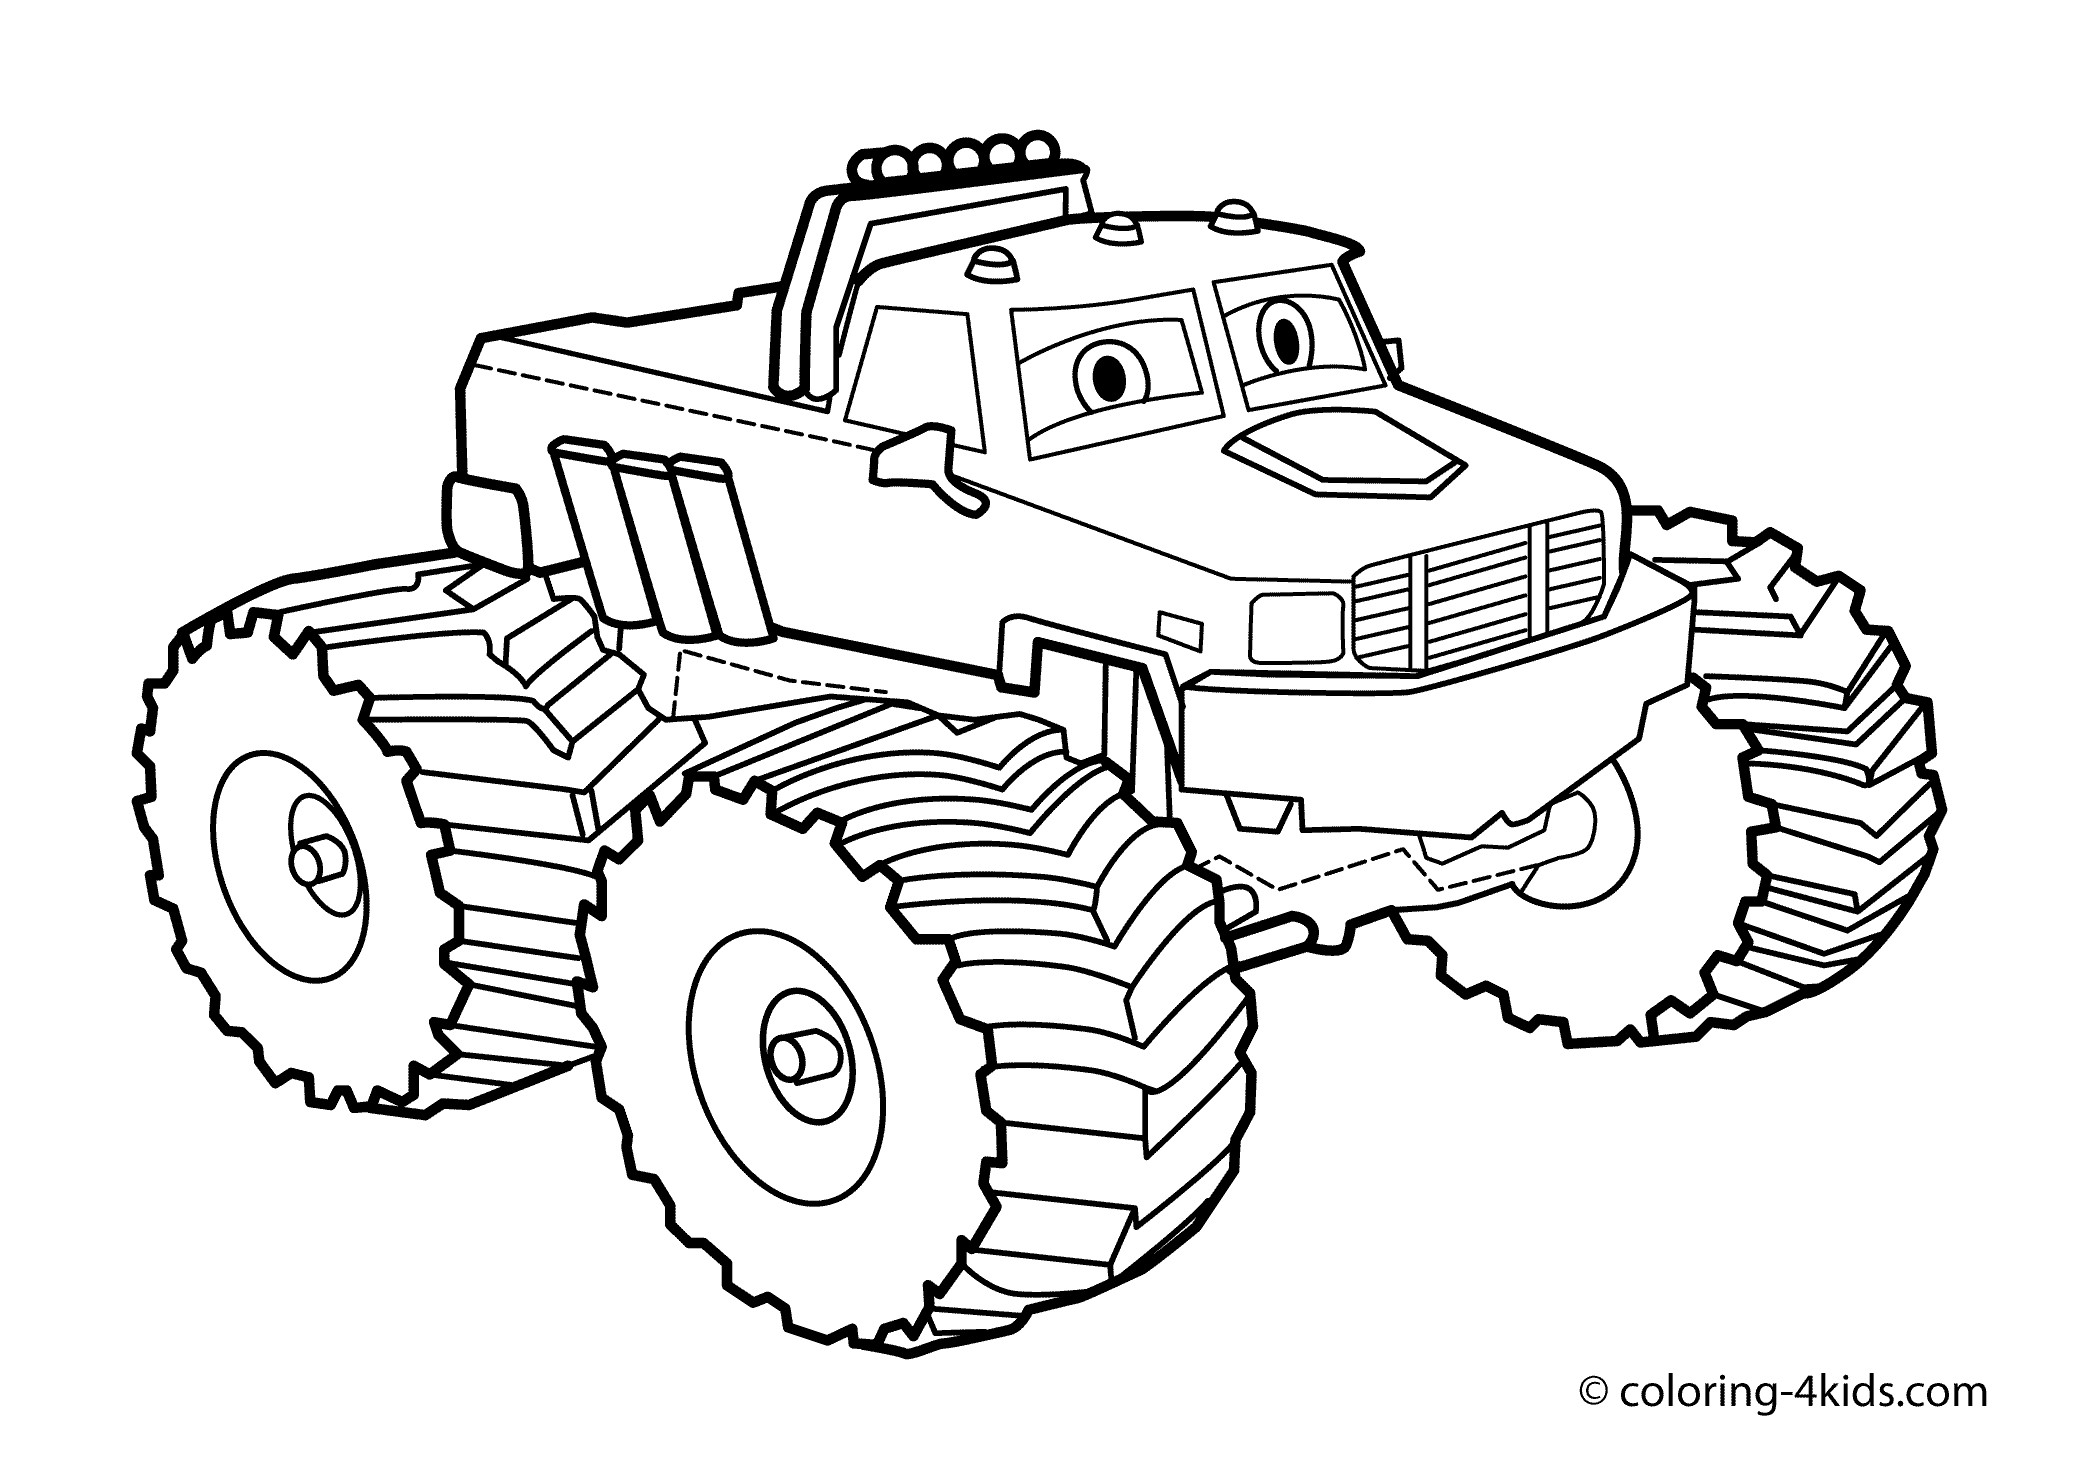 Coloring Pages Boys Monster Truck
 Monster truck Coloring page for kids monster truck